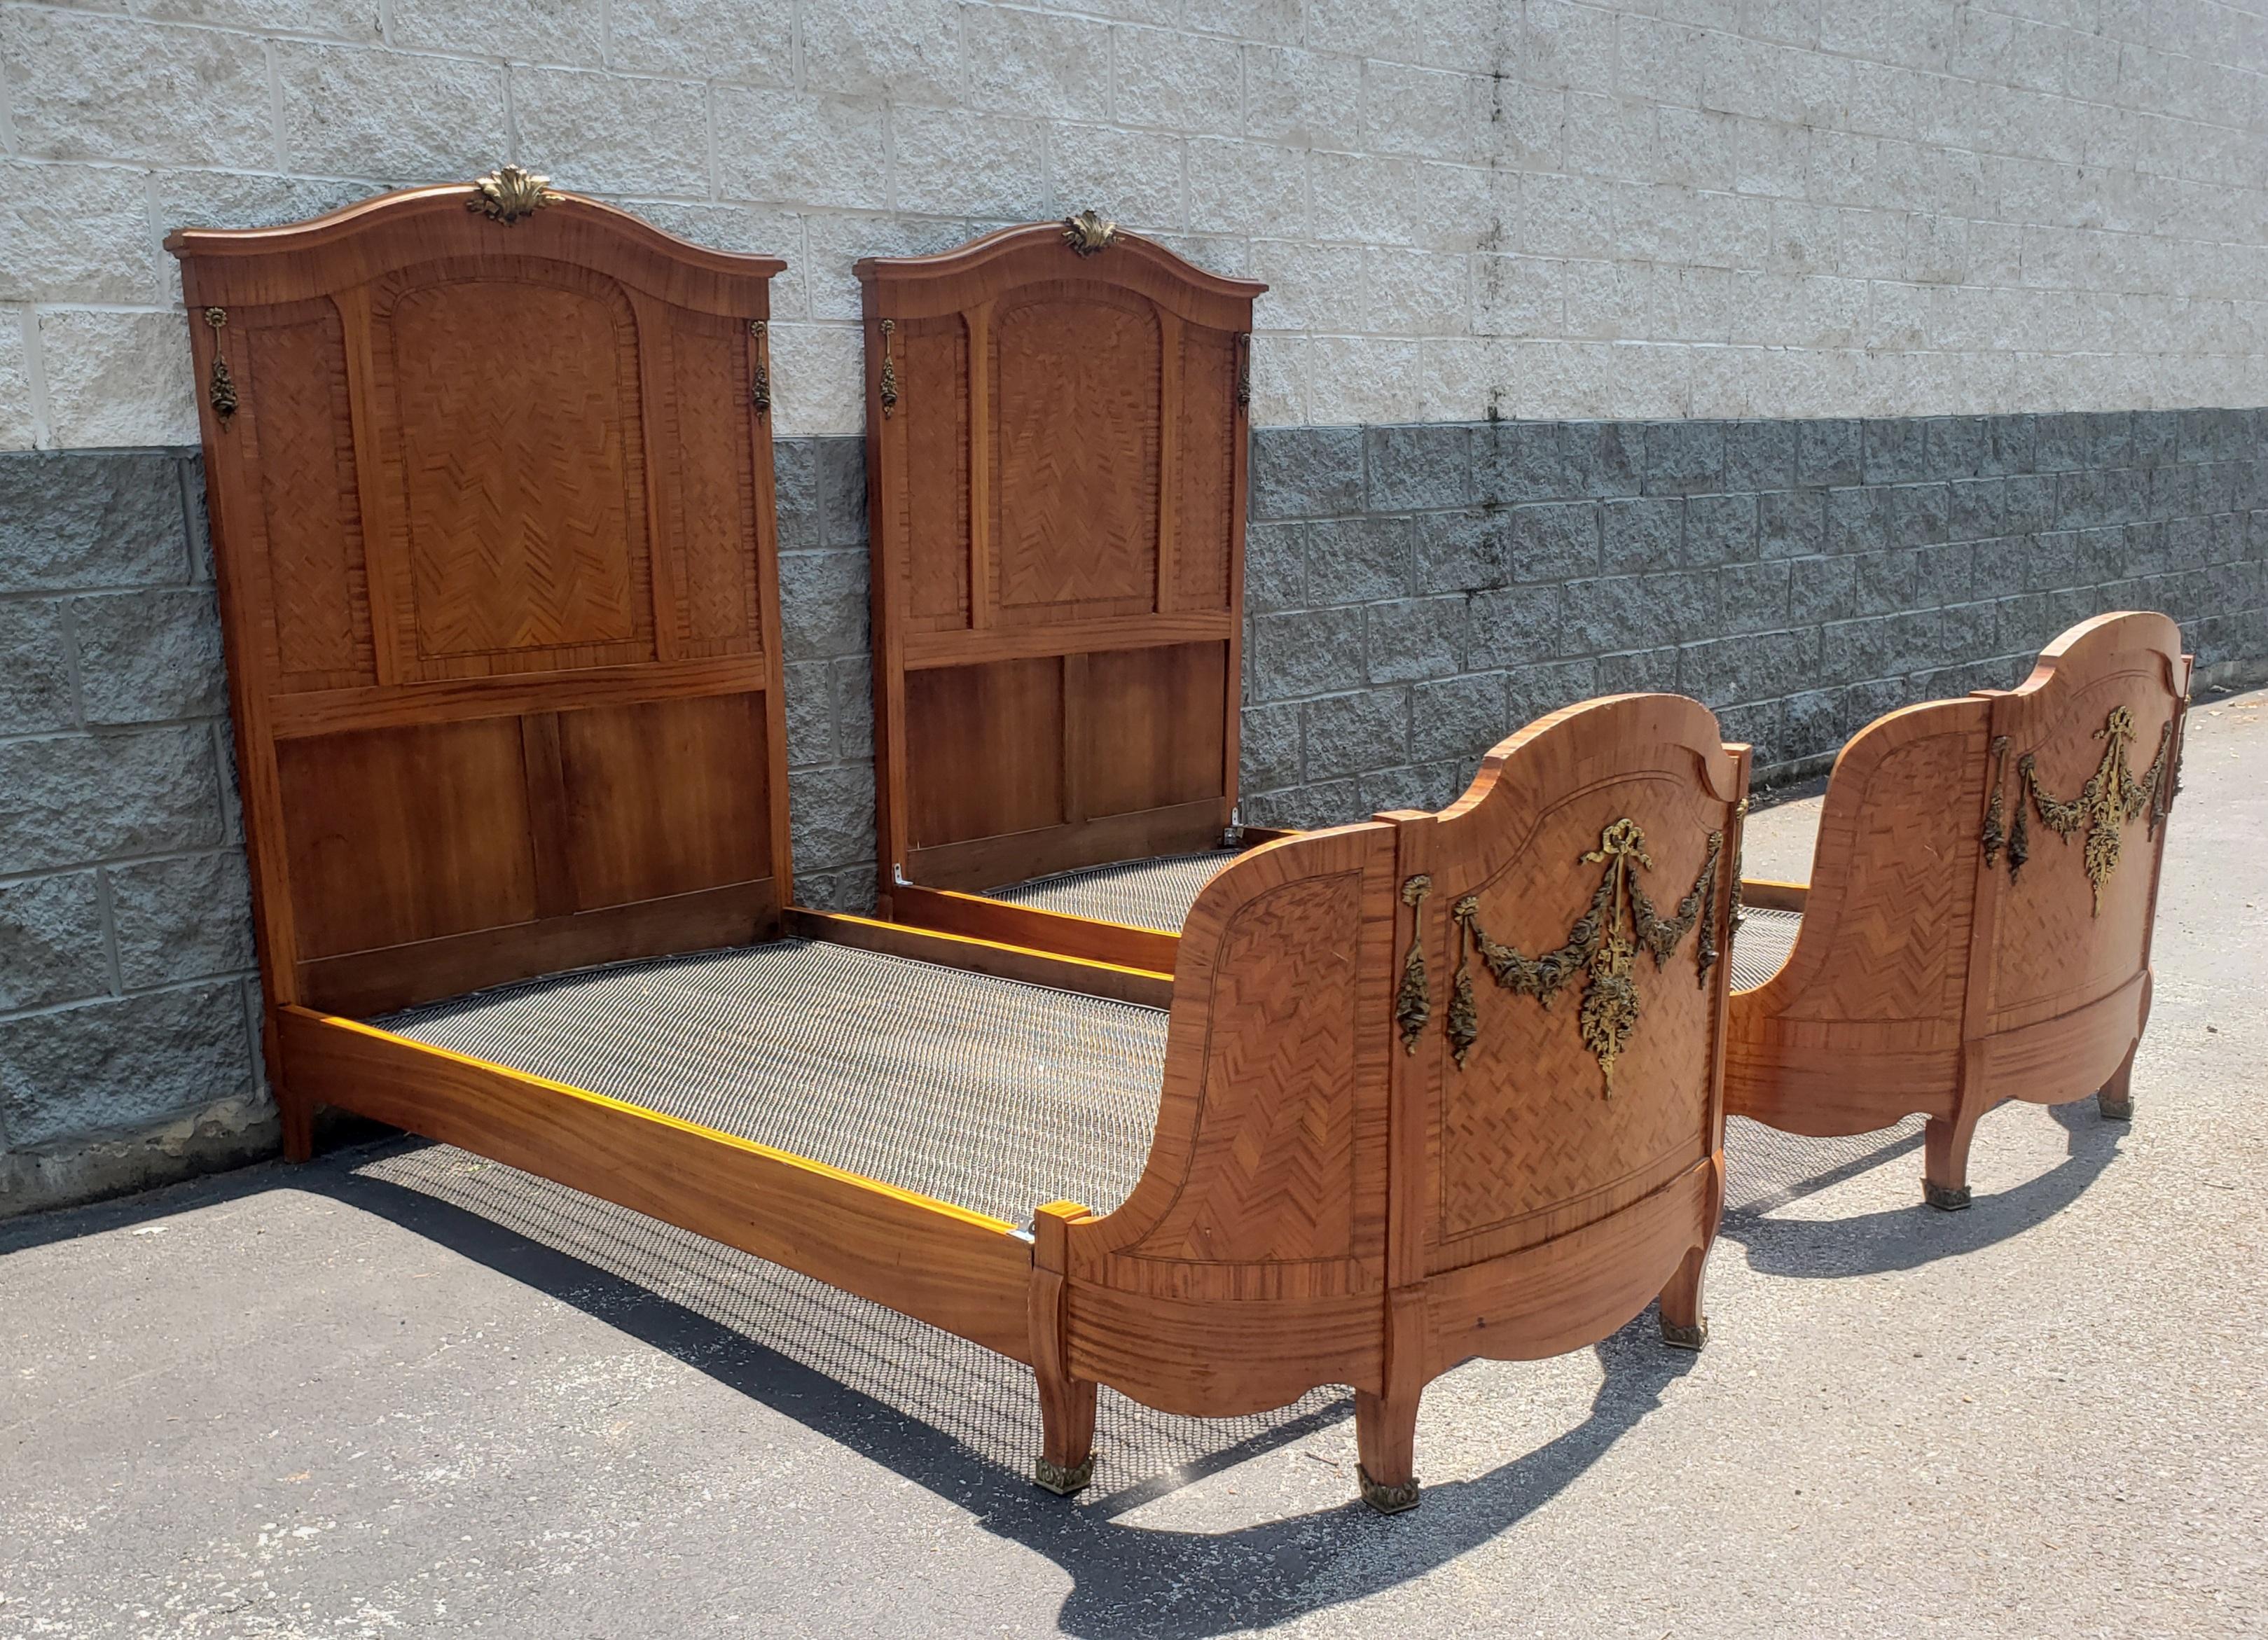 1870s Dutch Rococo Style Fruitwood and Satinwood Inlaid & Ormolu Bedsteads, Pair In Good Condition For Sale In Germantown, MD